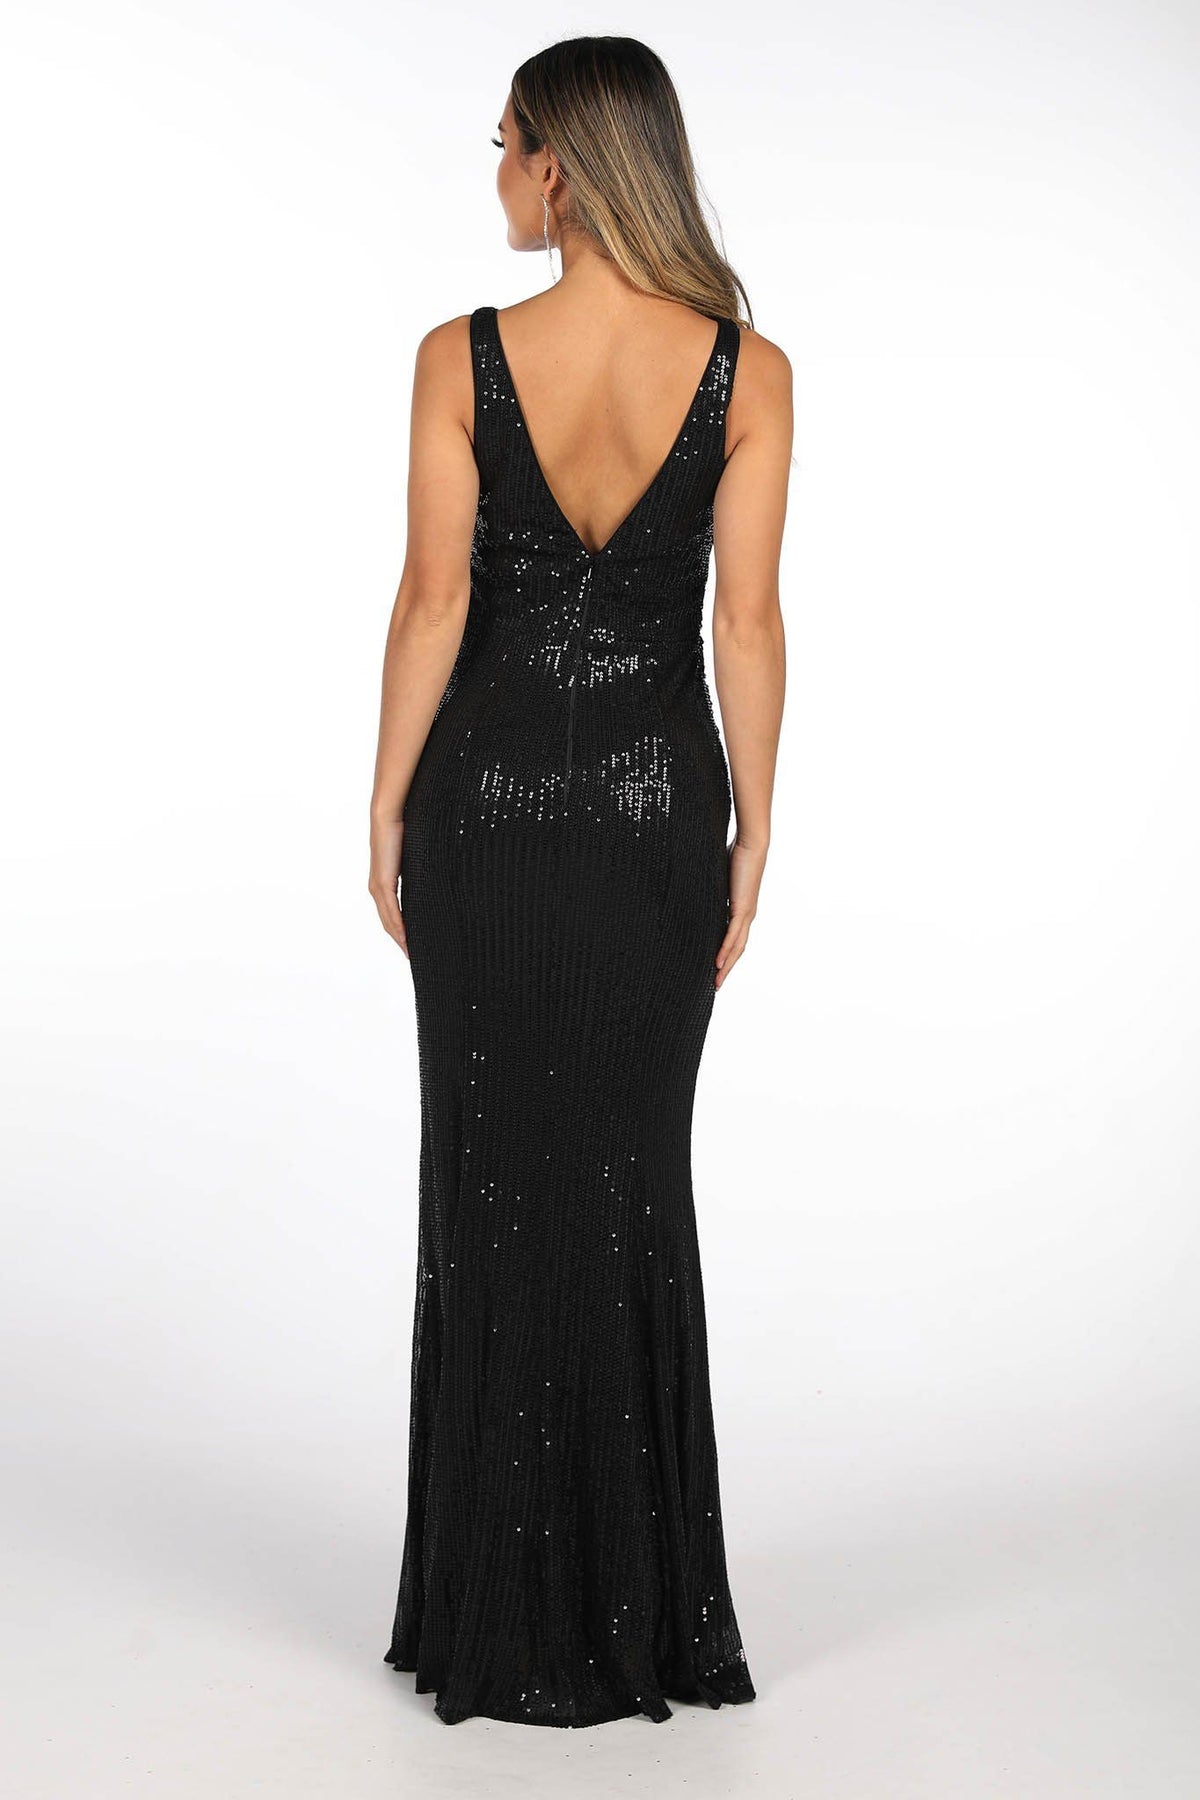 V Open Back Design of Black Full Length Sequin Evening Gown featuring V Neckline with mesh insert at bust, Gathering Detail at the centre front and Open V Back